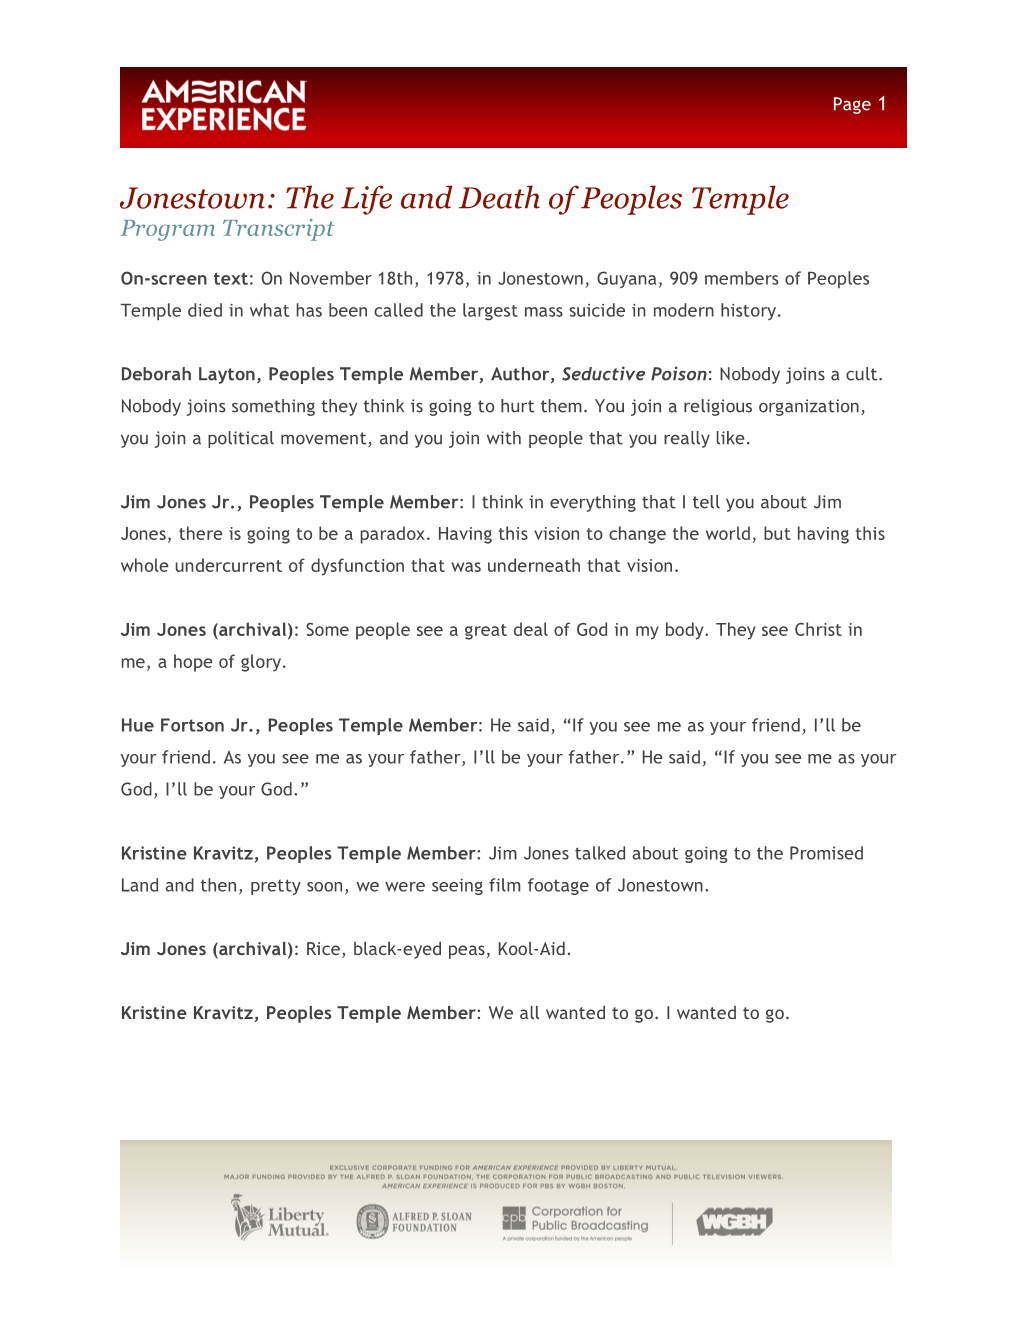 Jonestown: the Life and Death of Peoples Temple Program Transcript